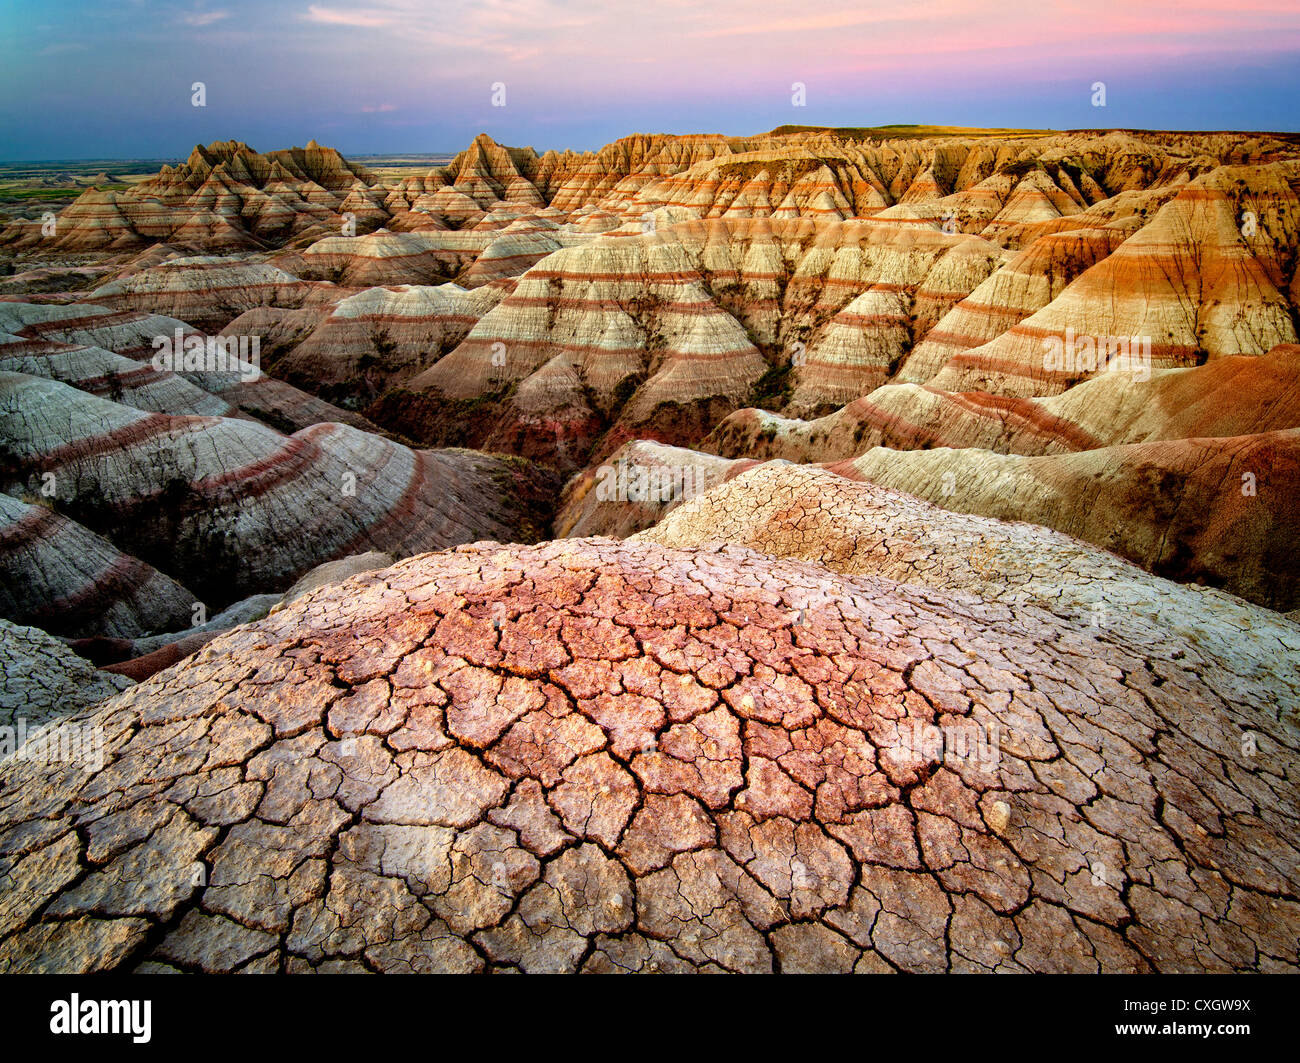 Eroded and cracked rock and mud formations. Badlands National Park. South Dakota formations. Stock Photo